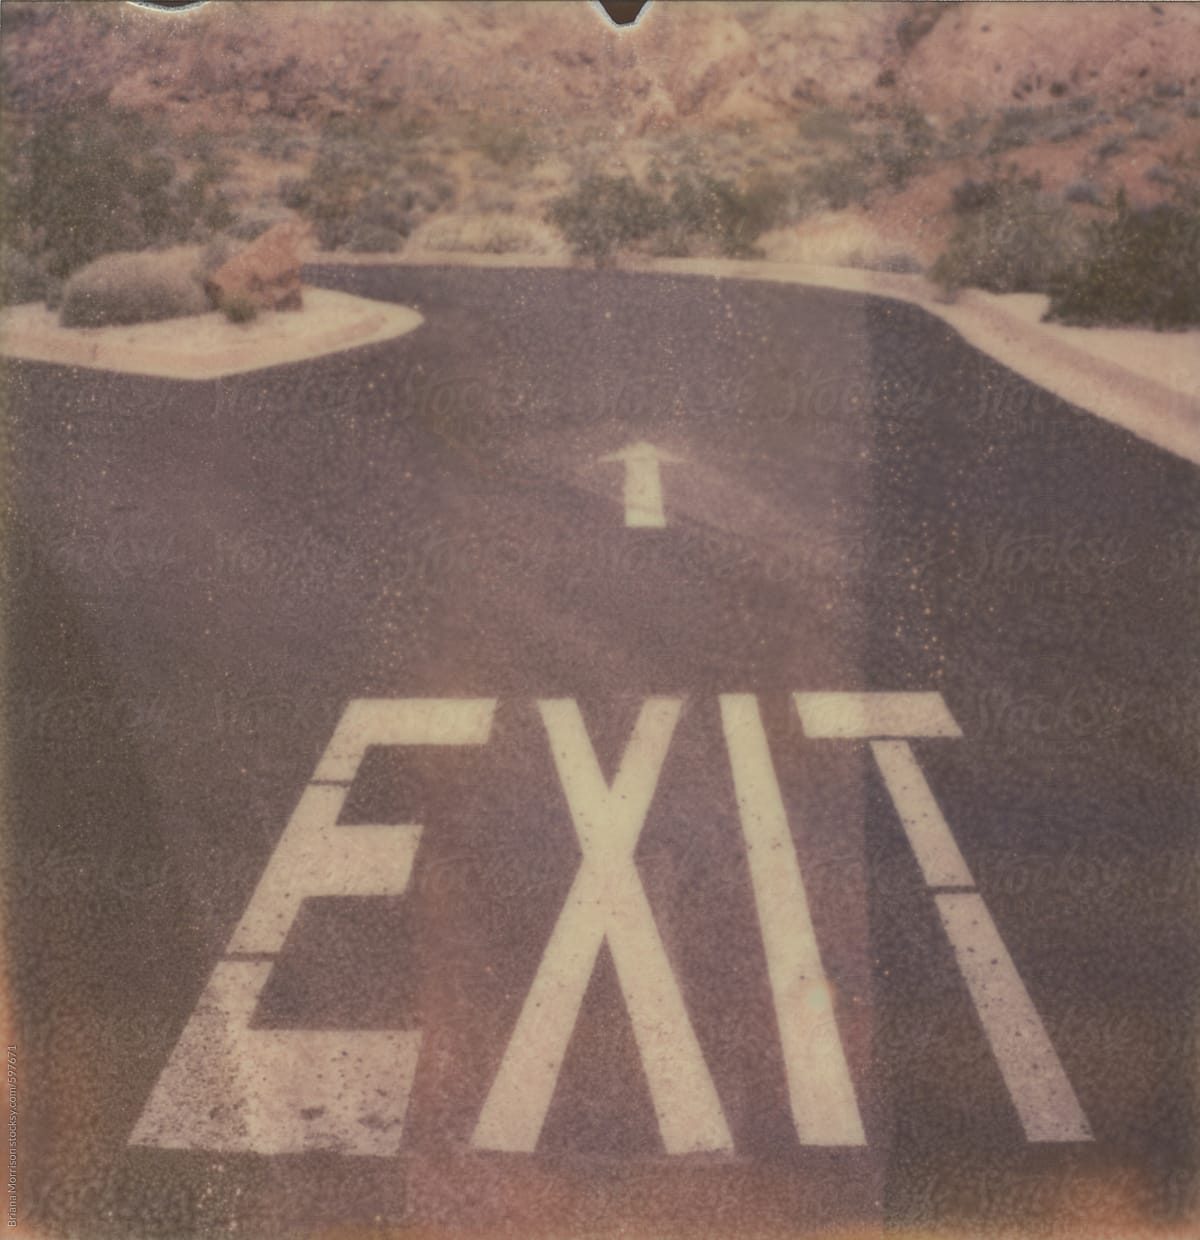 Exit Sign and Arrow Painted on Pavement in the Desert